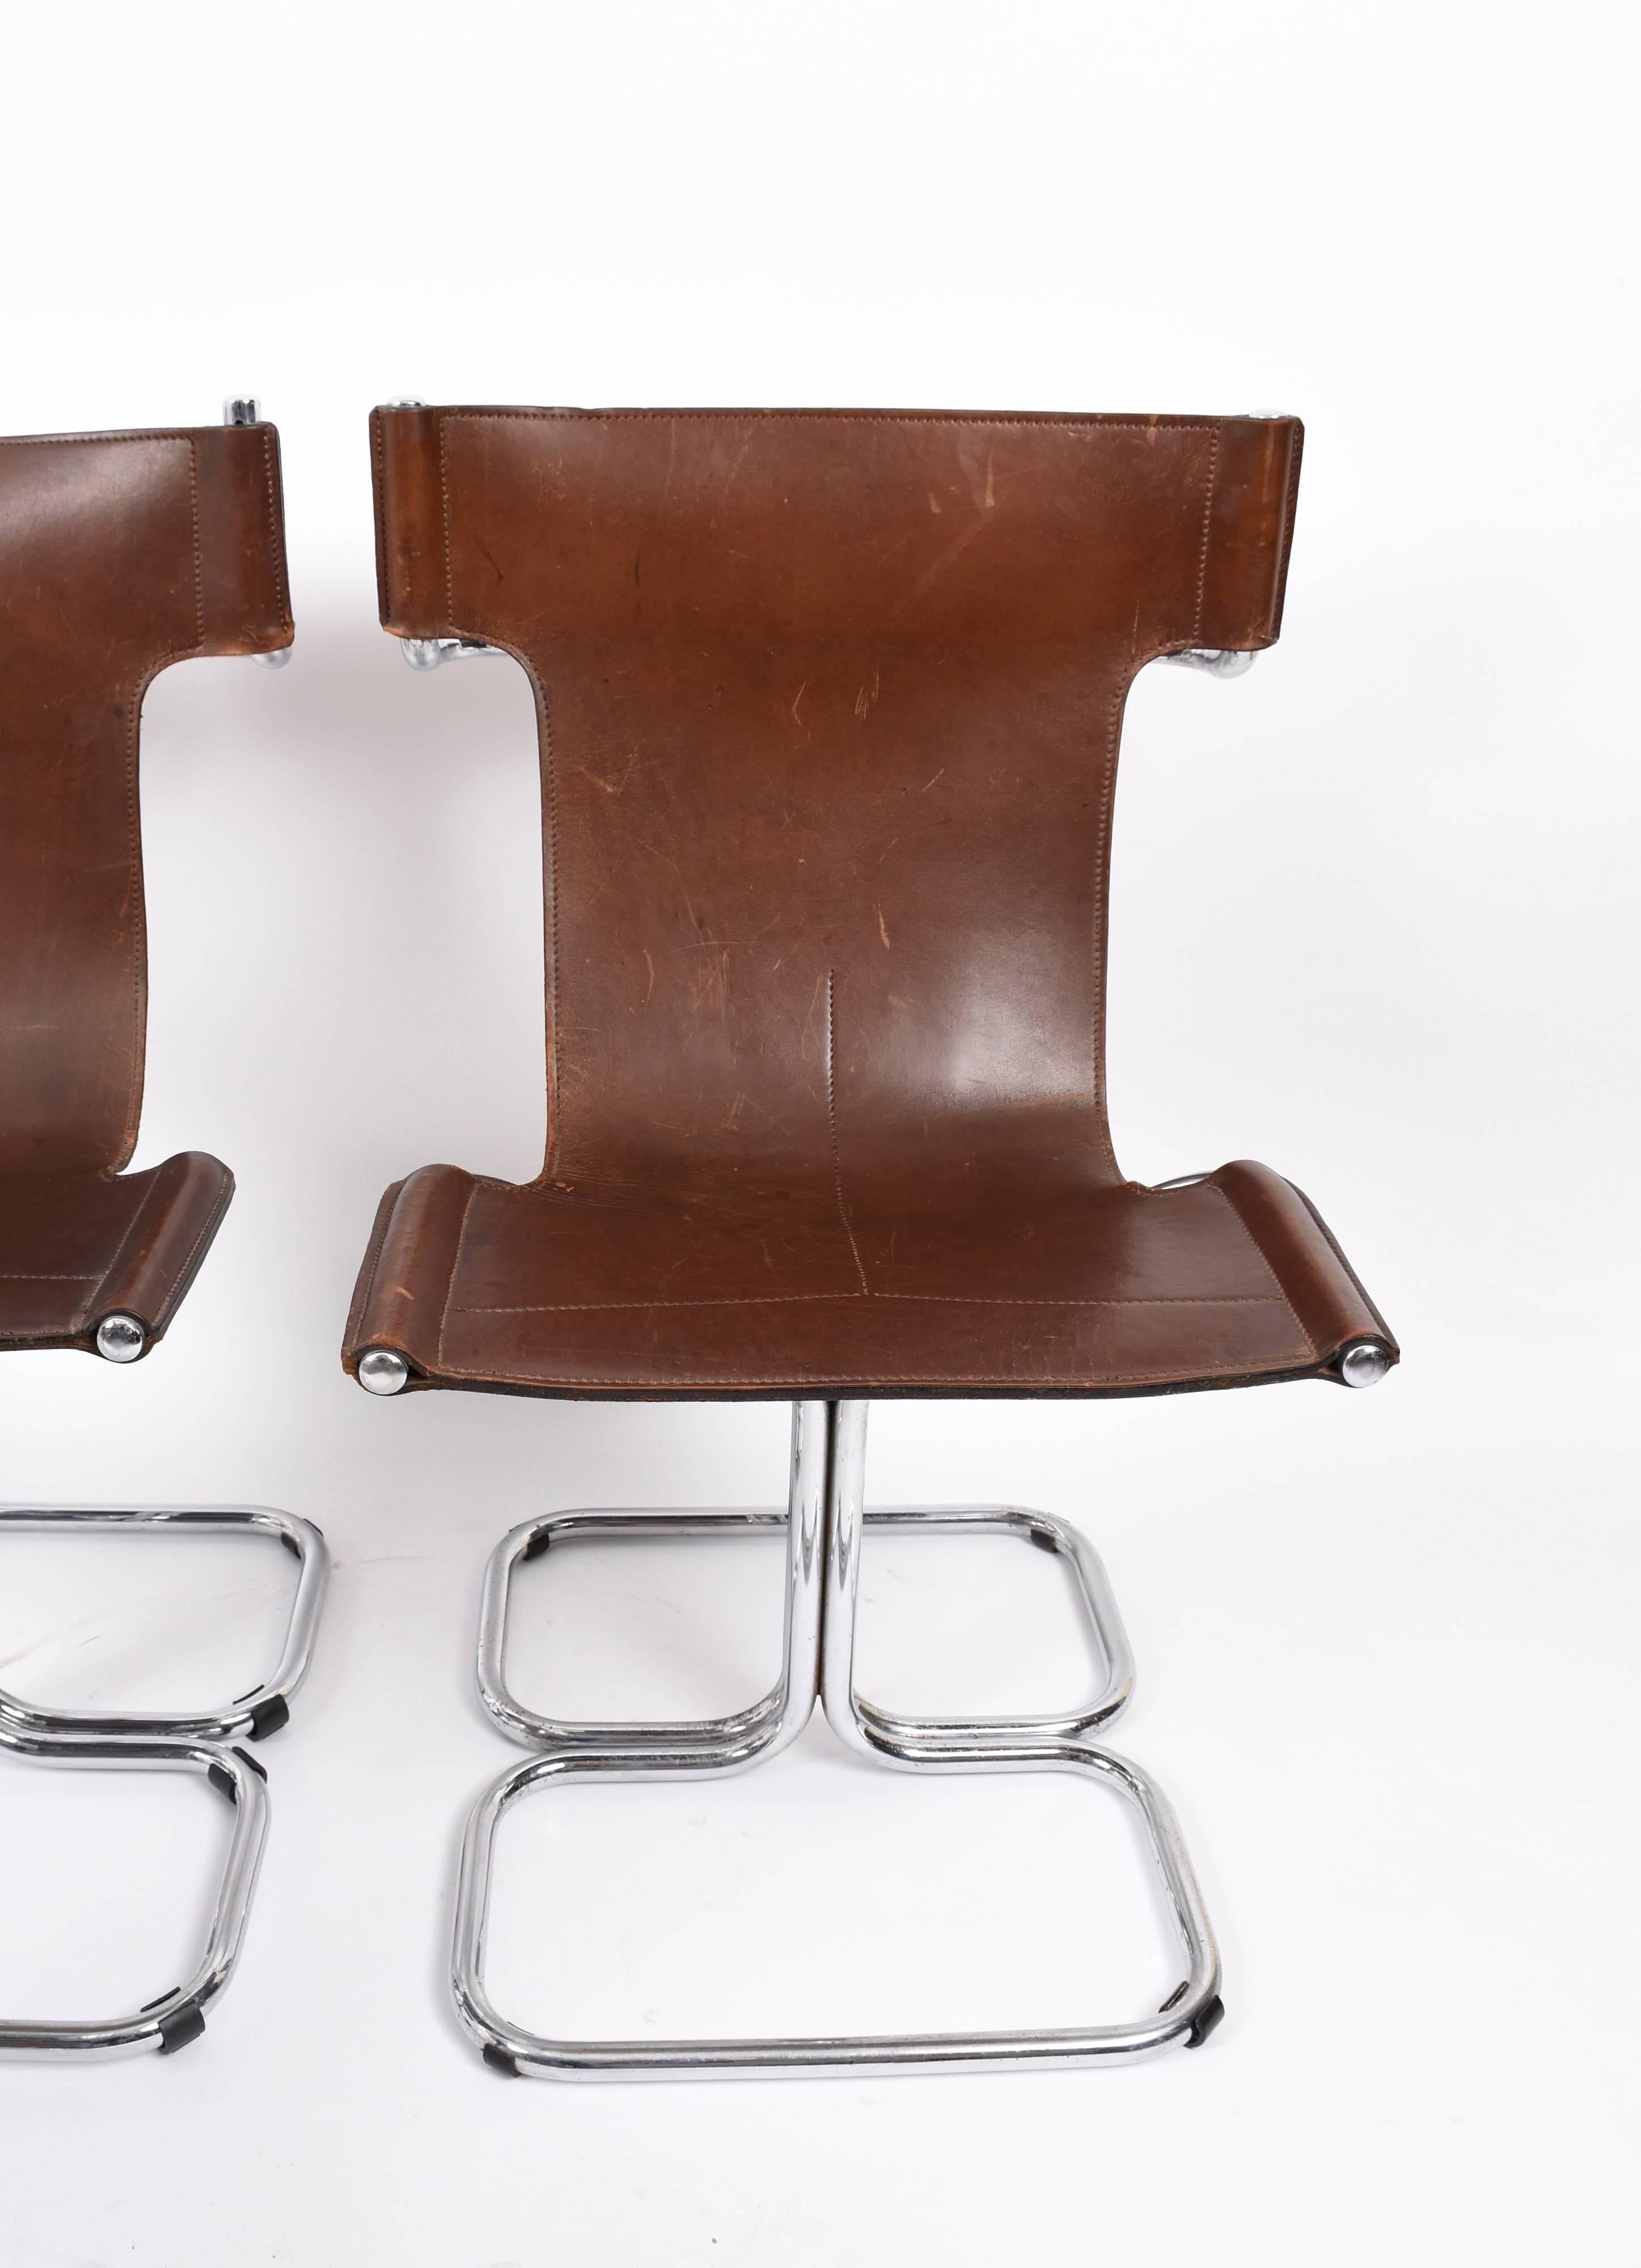 The four chairs are also in original leather condition with tubular steel legs, numbered and initial IF. They have a beautiful leather seam to emphasize its design

Leather and steel have normal usage marks.